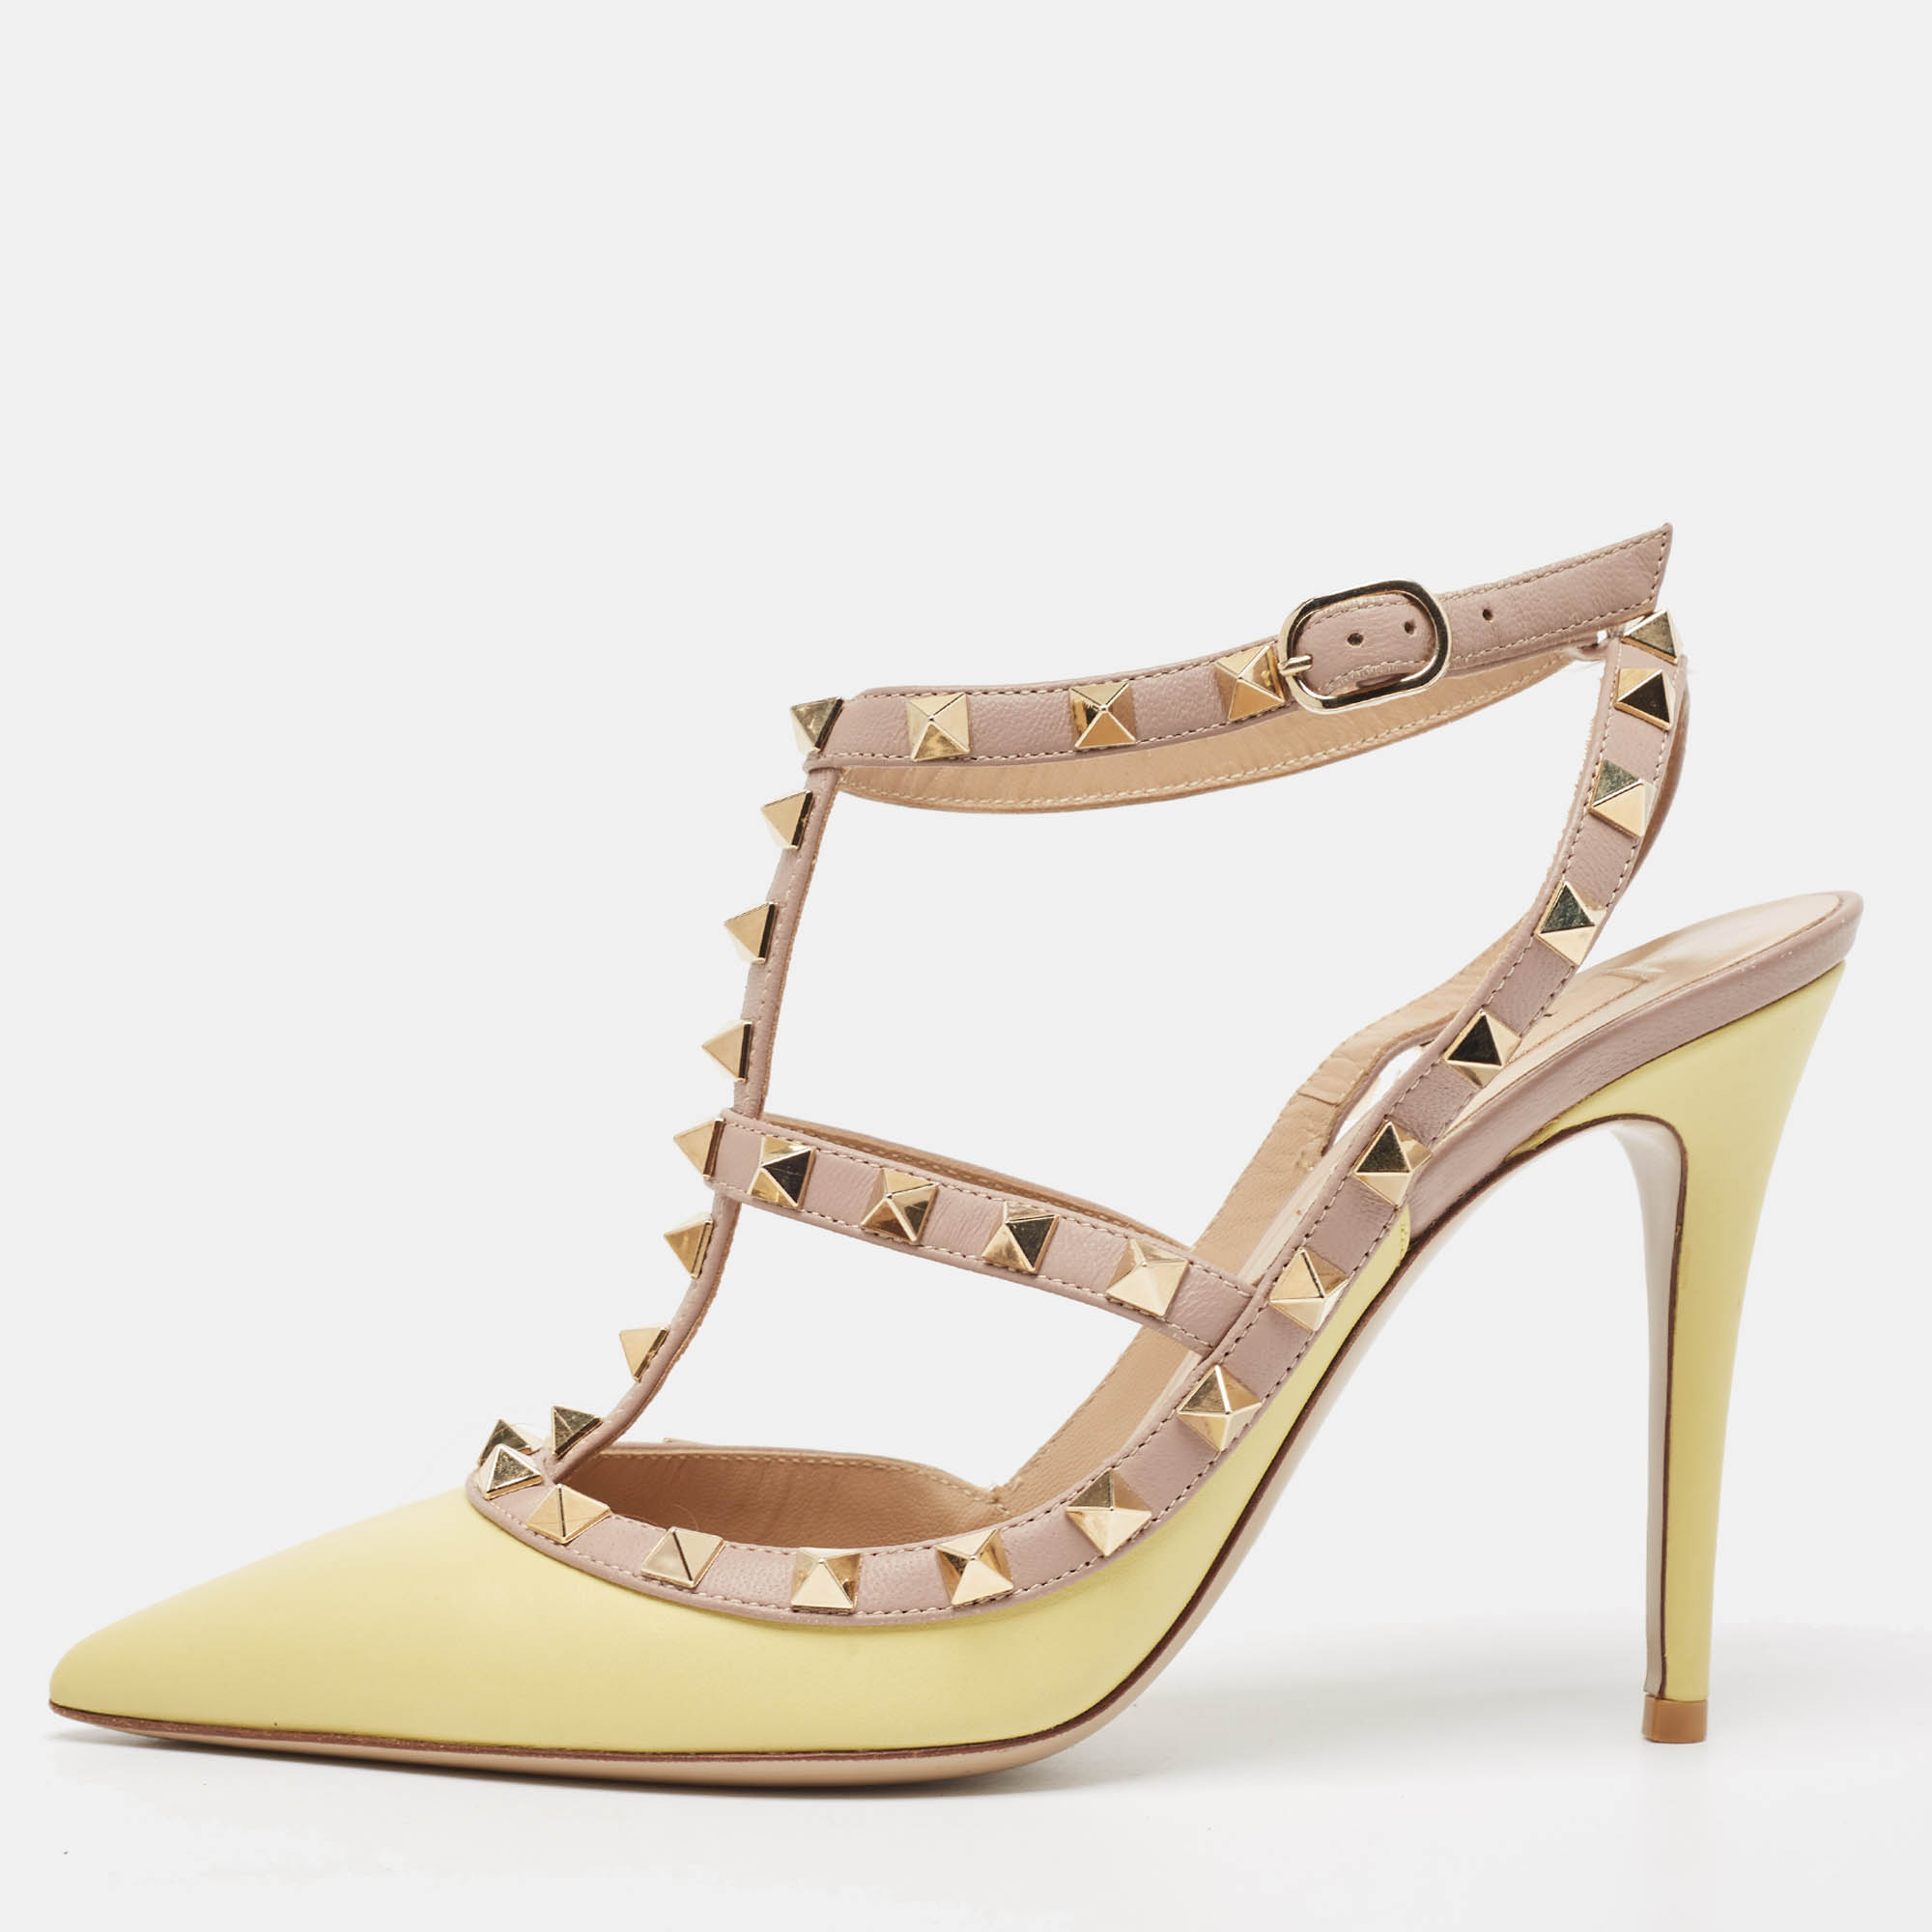 Valentino beige/yellow leather rockstud strappy pointed toe pumps size 37.5